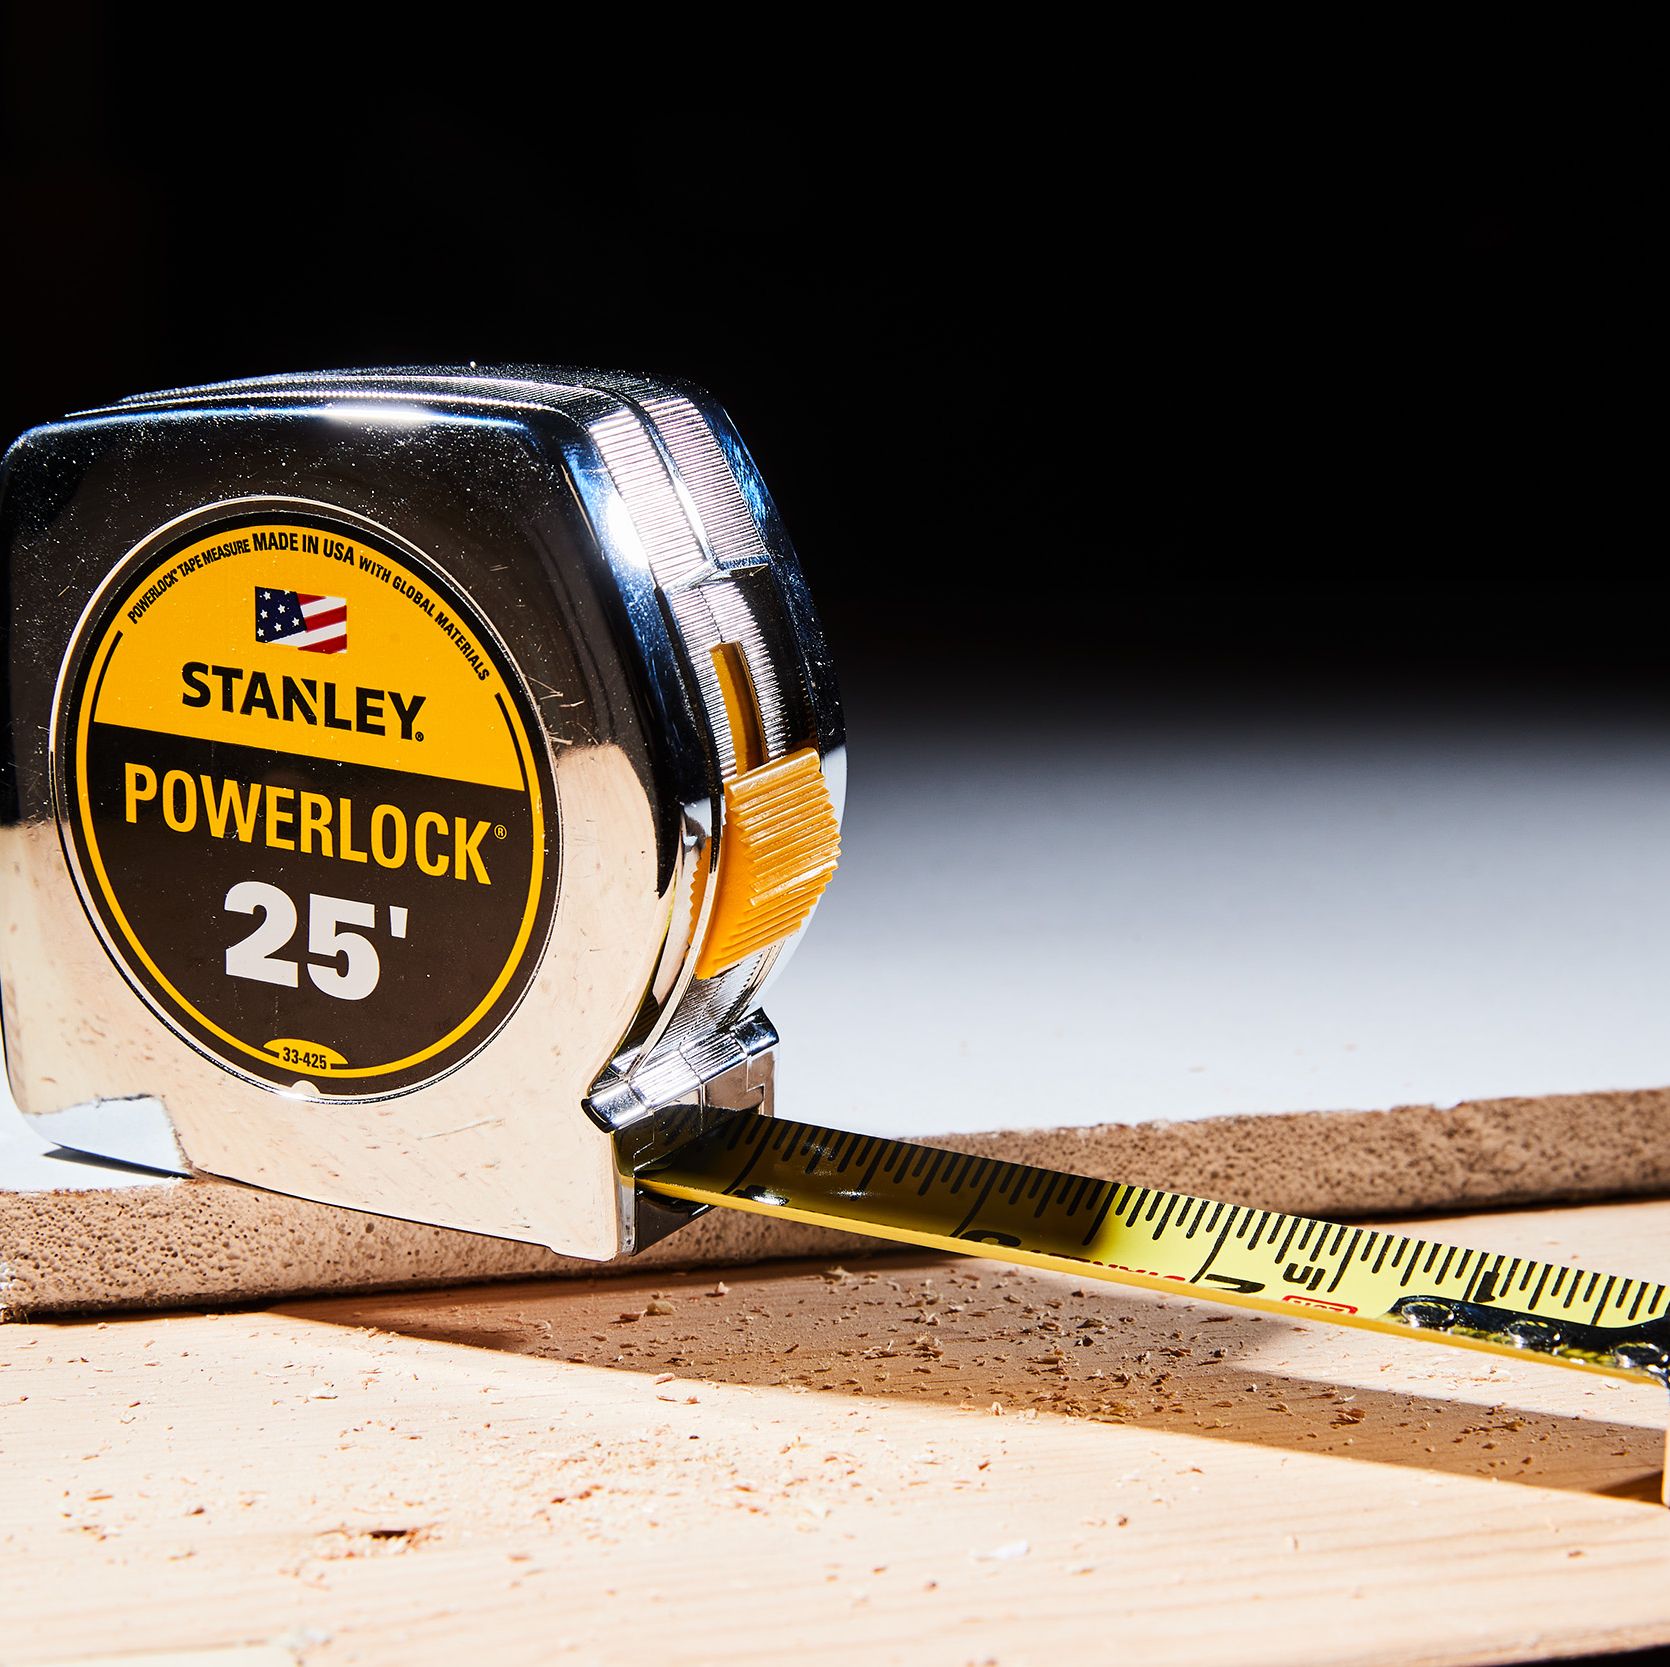 Save Your Project From a DIY Disaster With One of These Super-Accurate Tape Measures